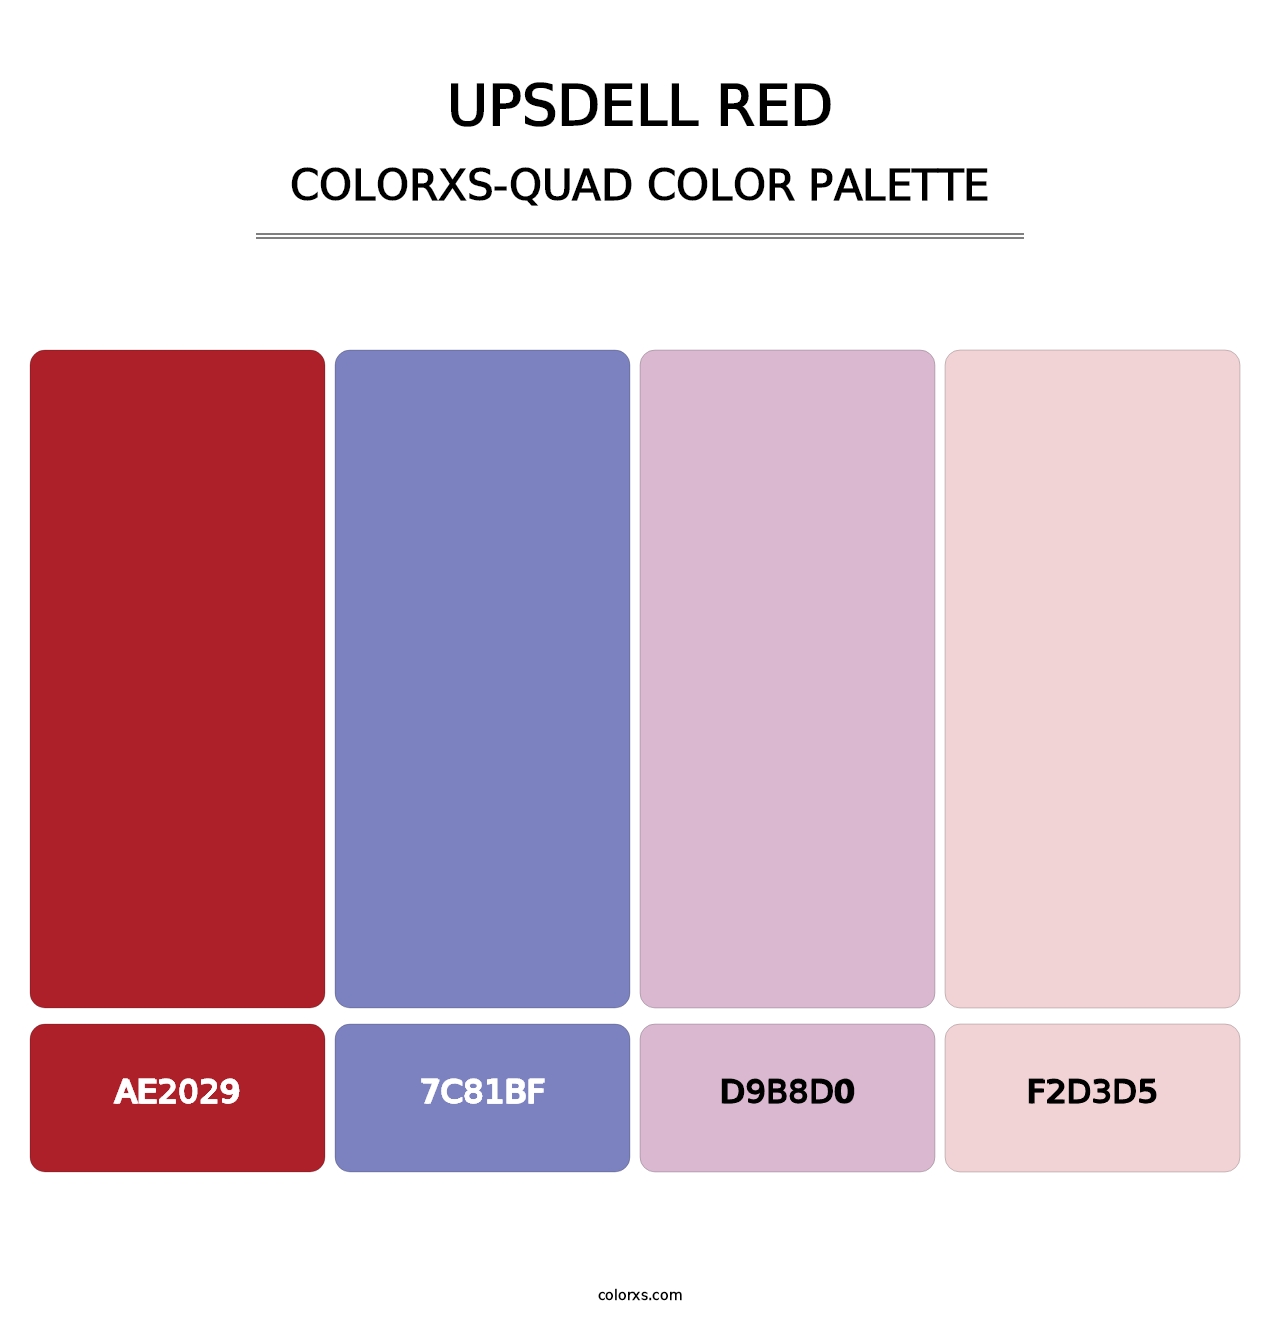 Upsdell Red - Colorxs Quad Palette